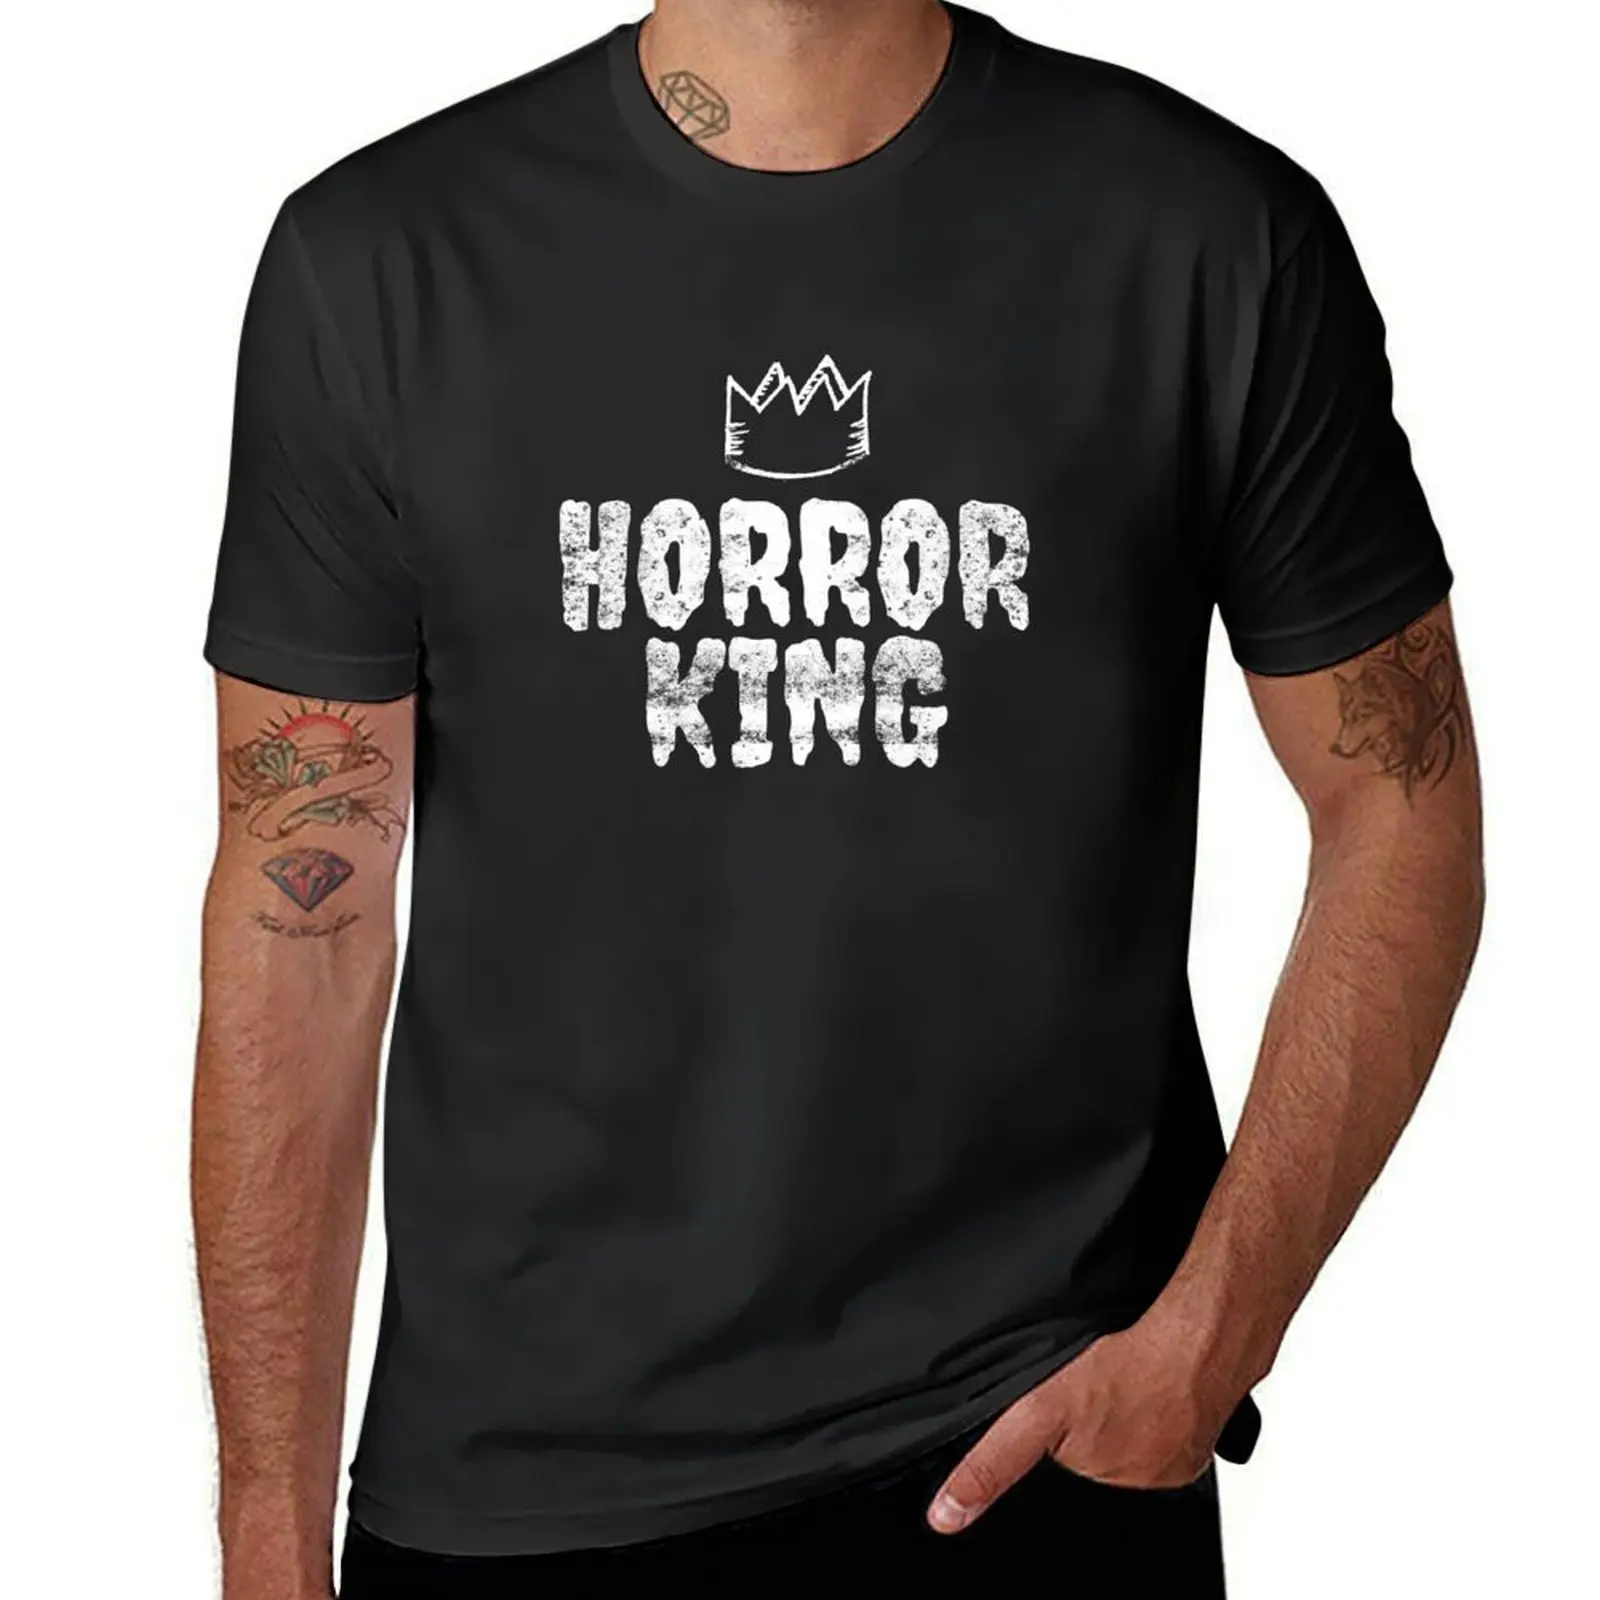 

HORROR KING T-shirt aesthetic clothes plus size tops vintage clothes mens t shirts casual stylish